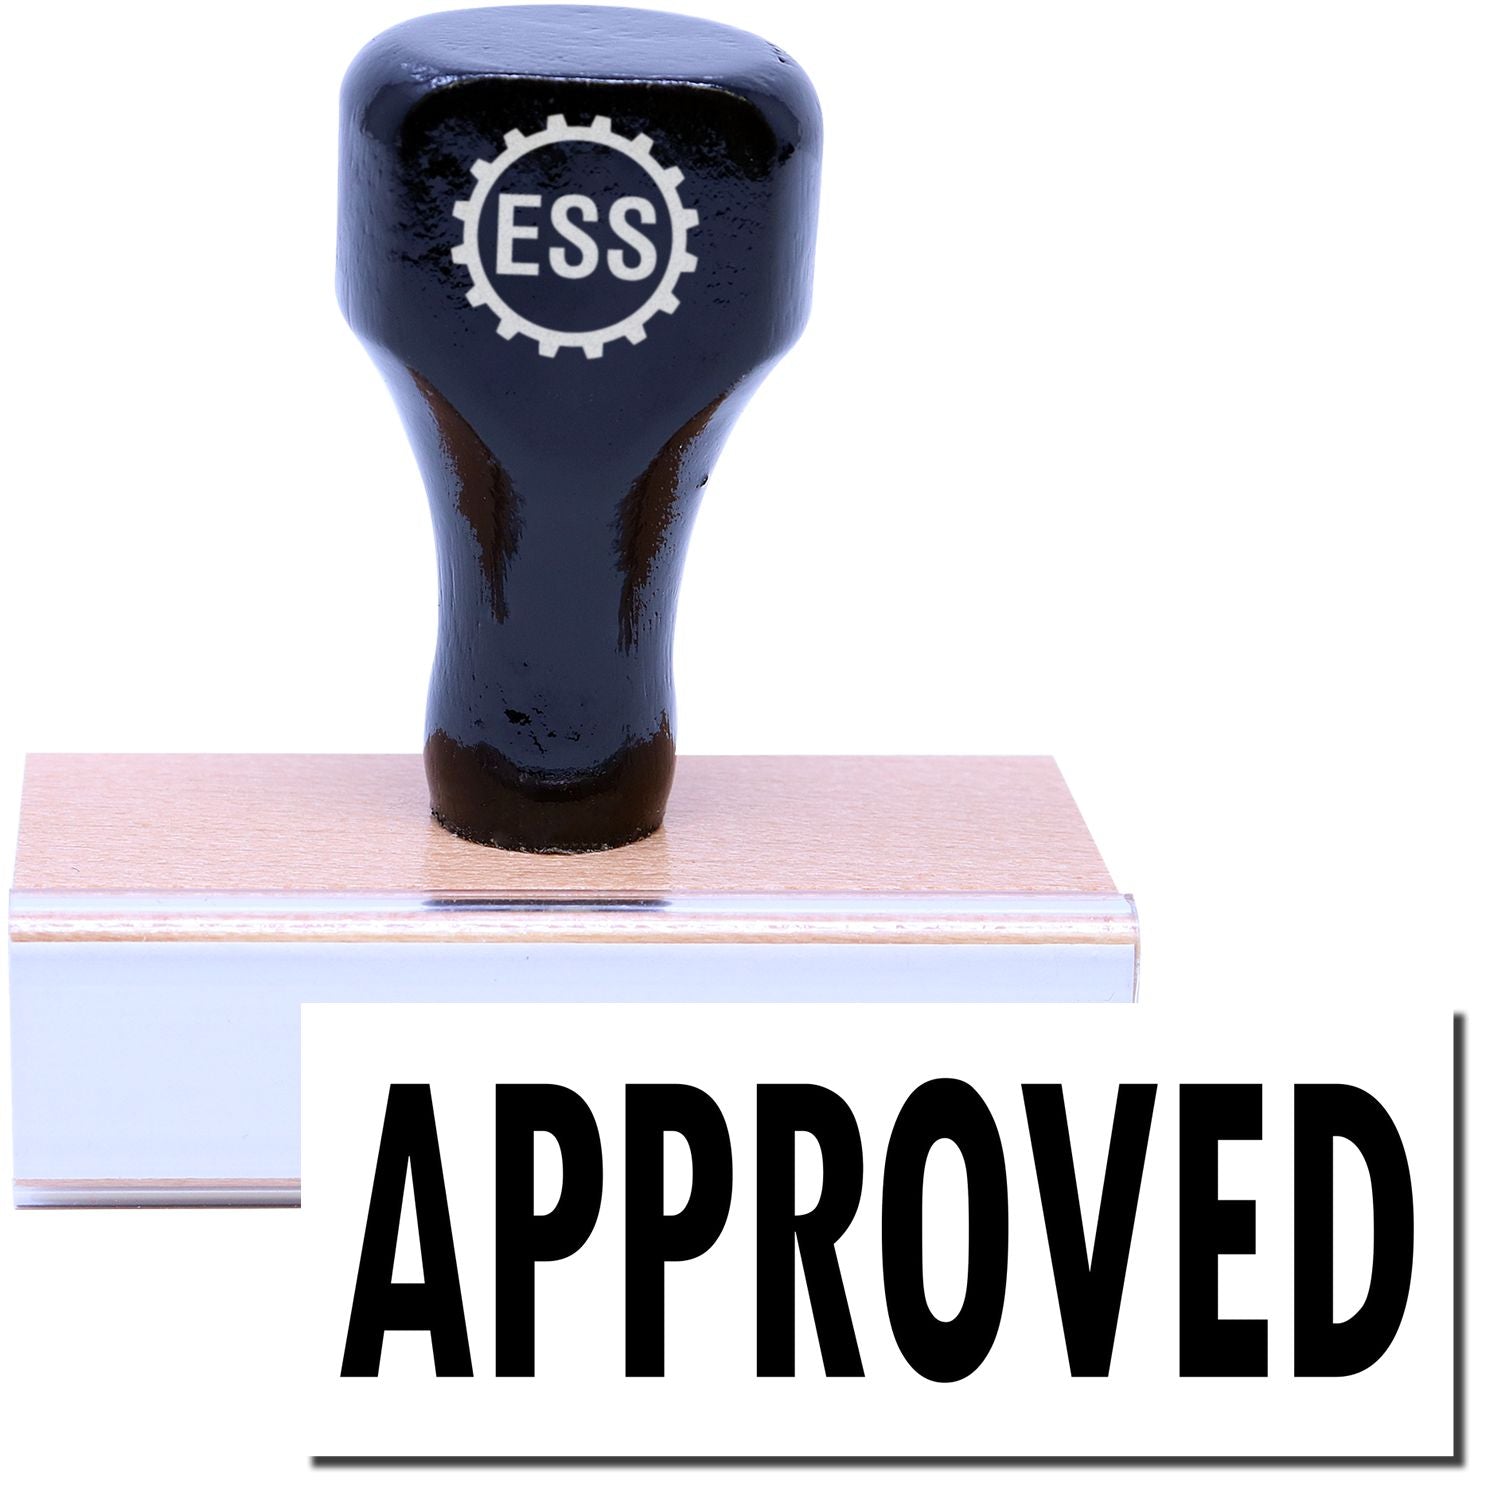 A stock office rubber stamp with a stamped image showing how the text "APPROVED" is displayed after stamping.